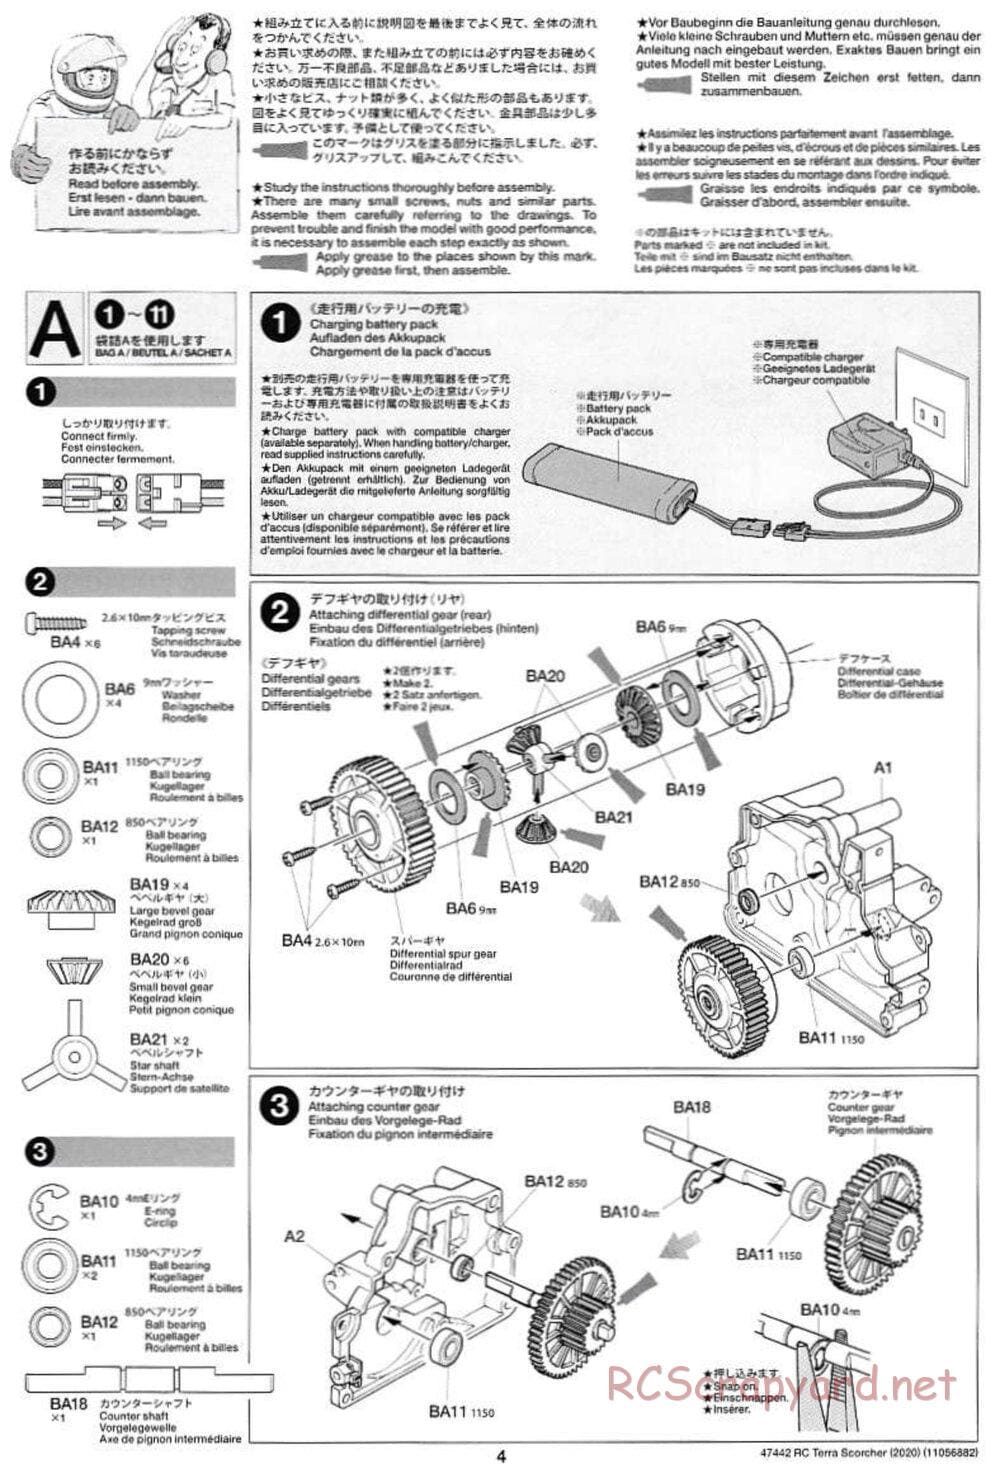 Tamiya - Terra Scorcher 2020 Chassis - Manual - Page 4